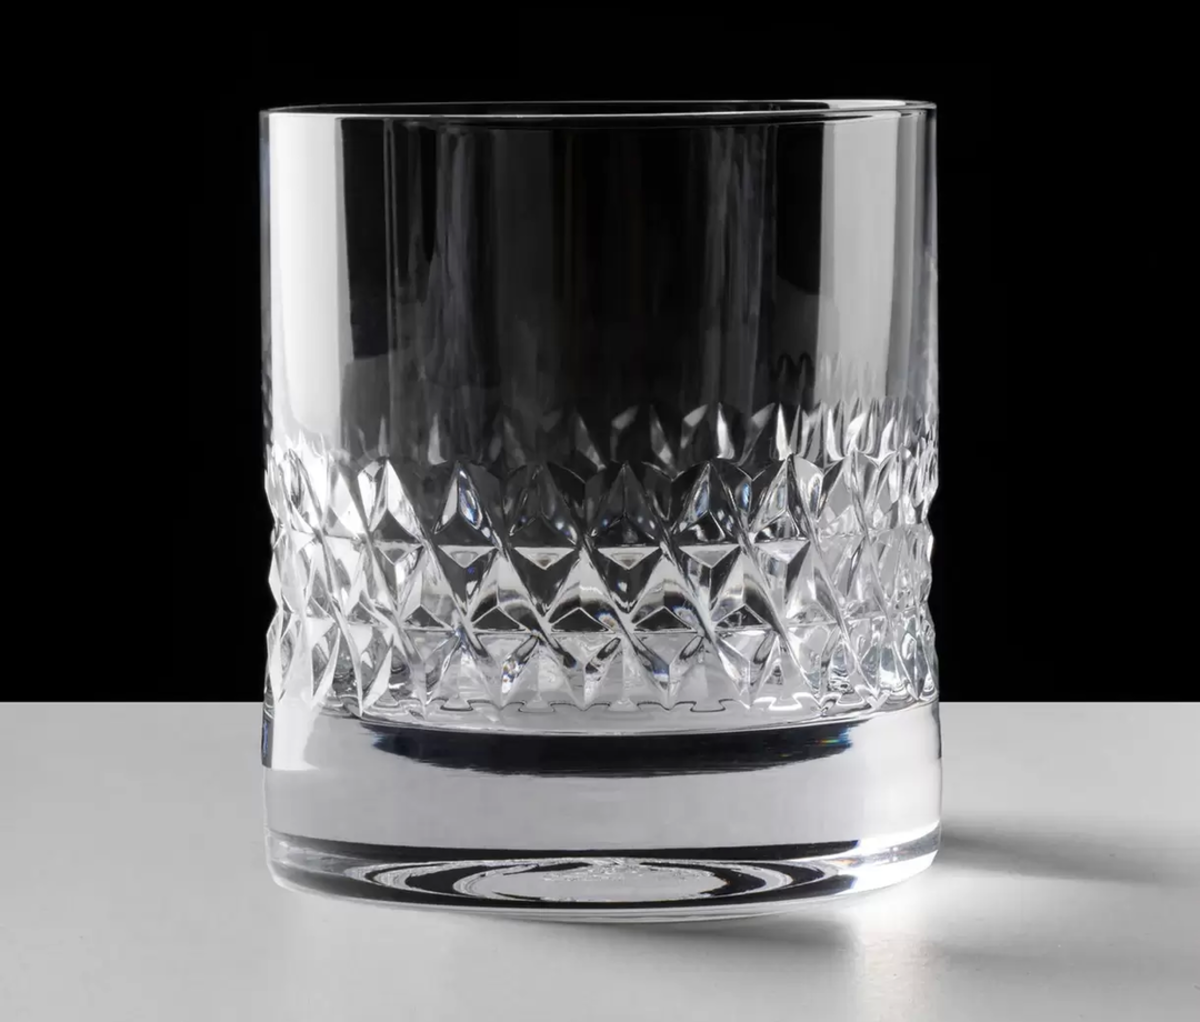 Search thick walled drinking glasses